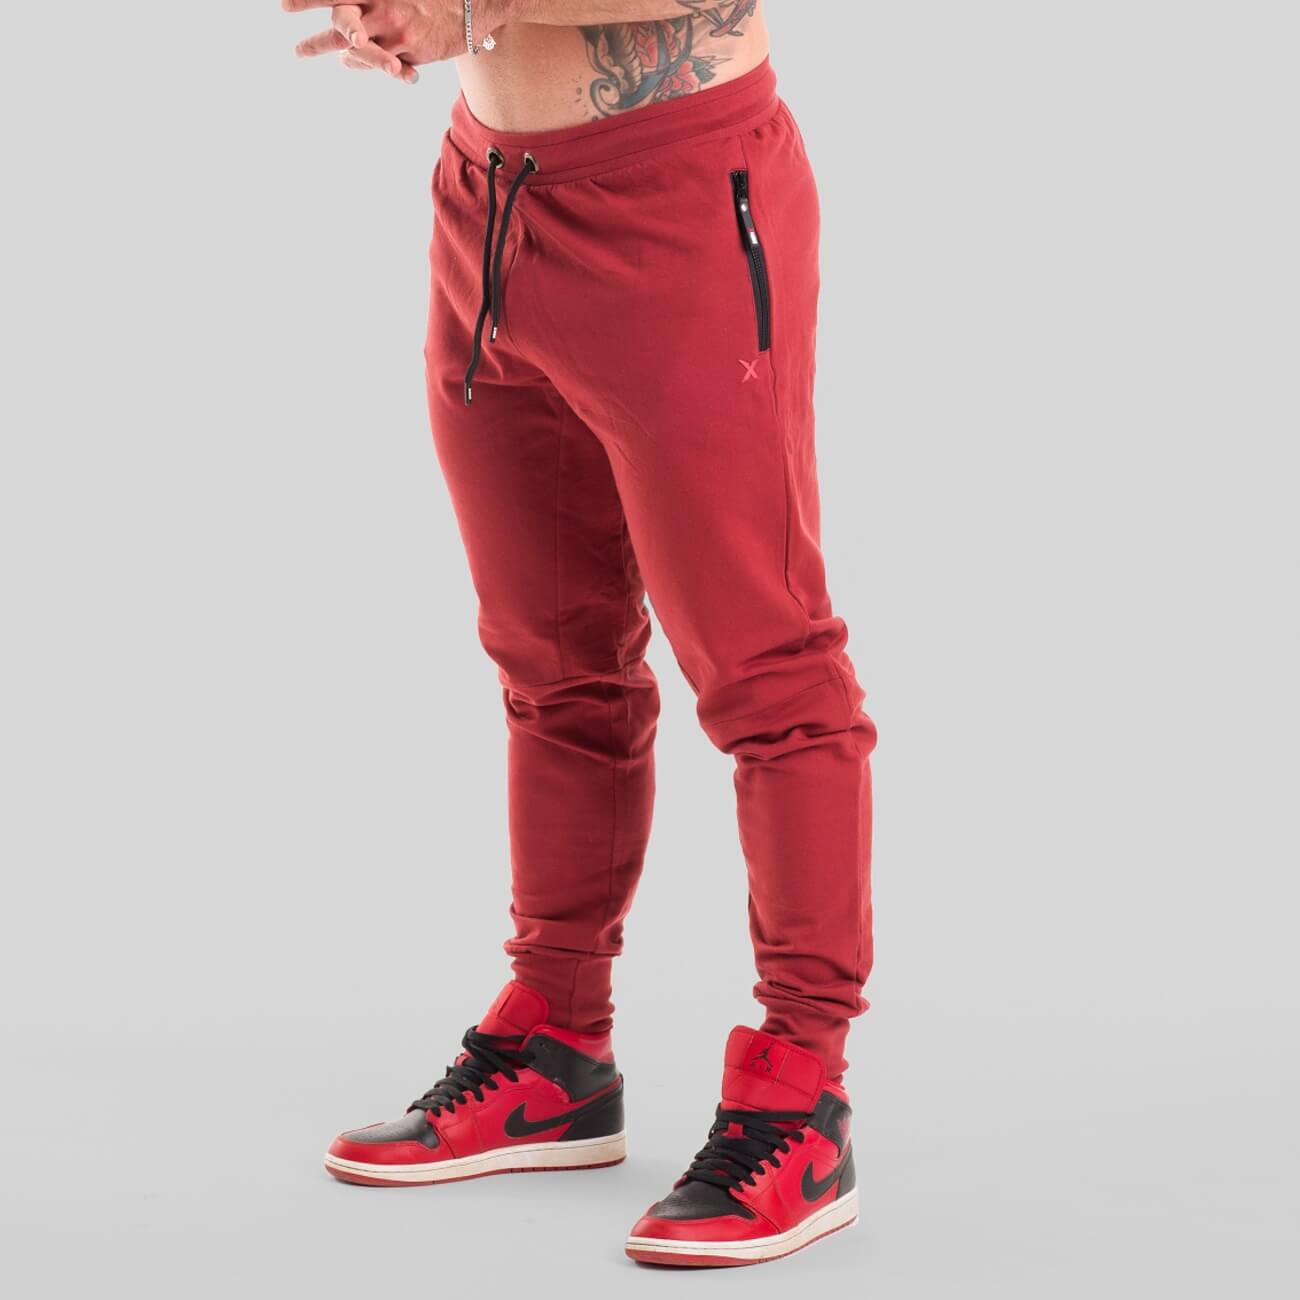 AESTHETIC-JOGGER-PANTS-RED-1